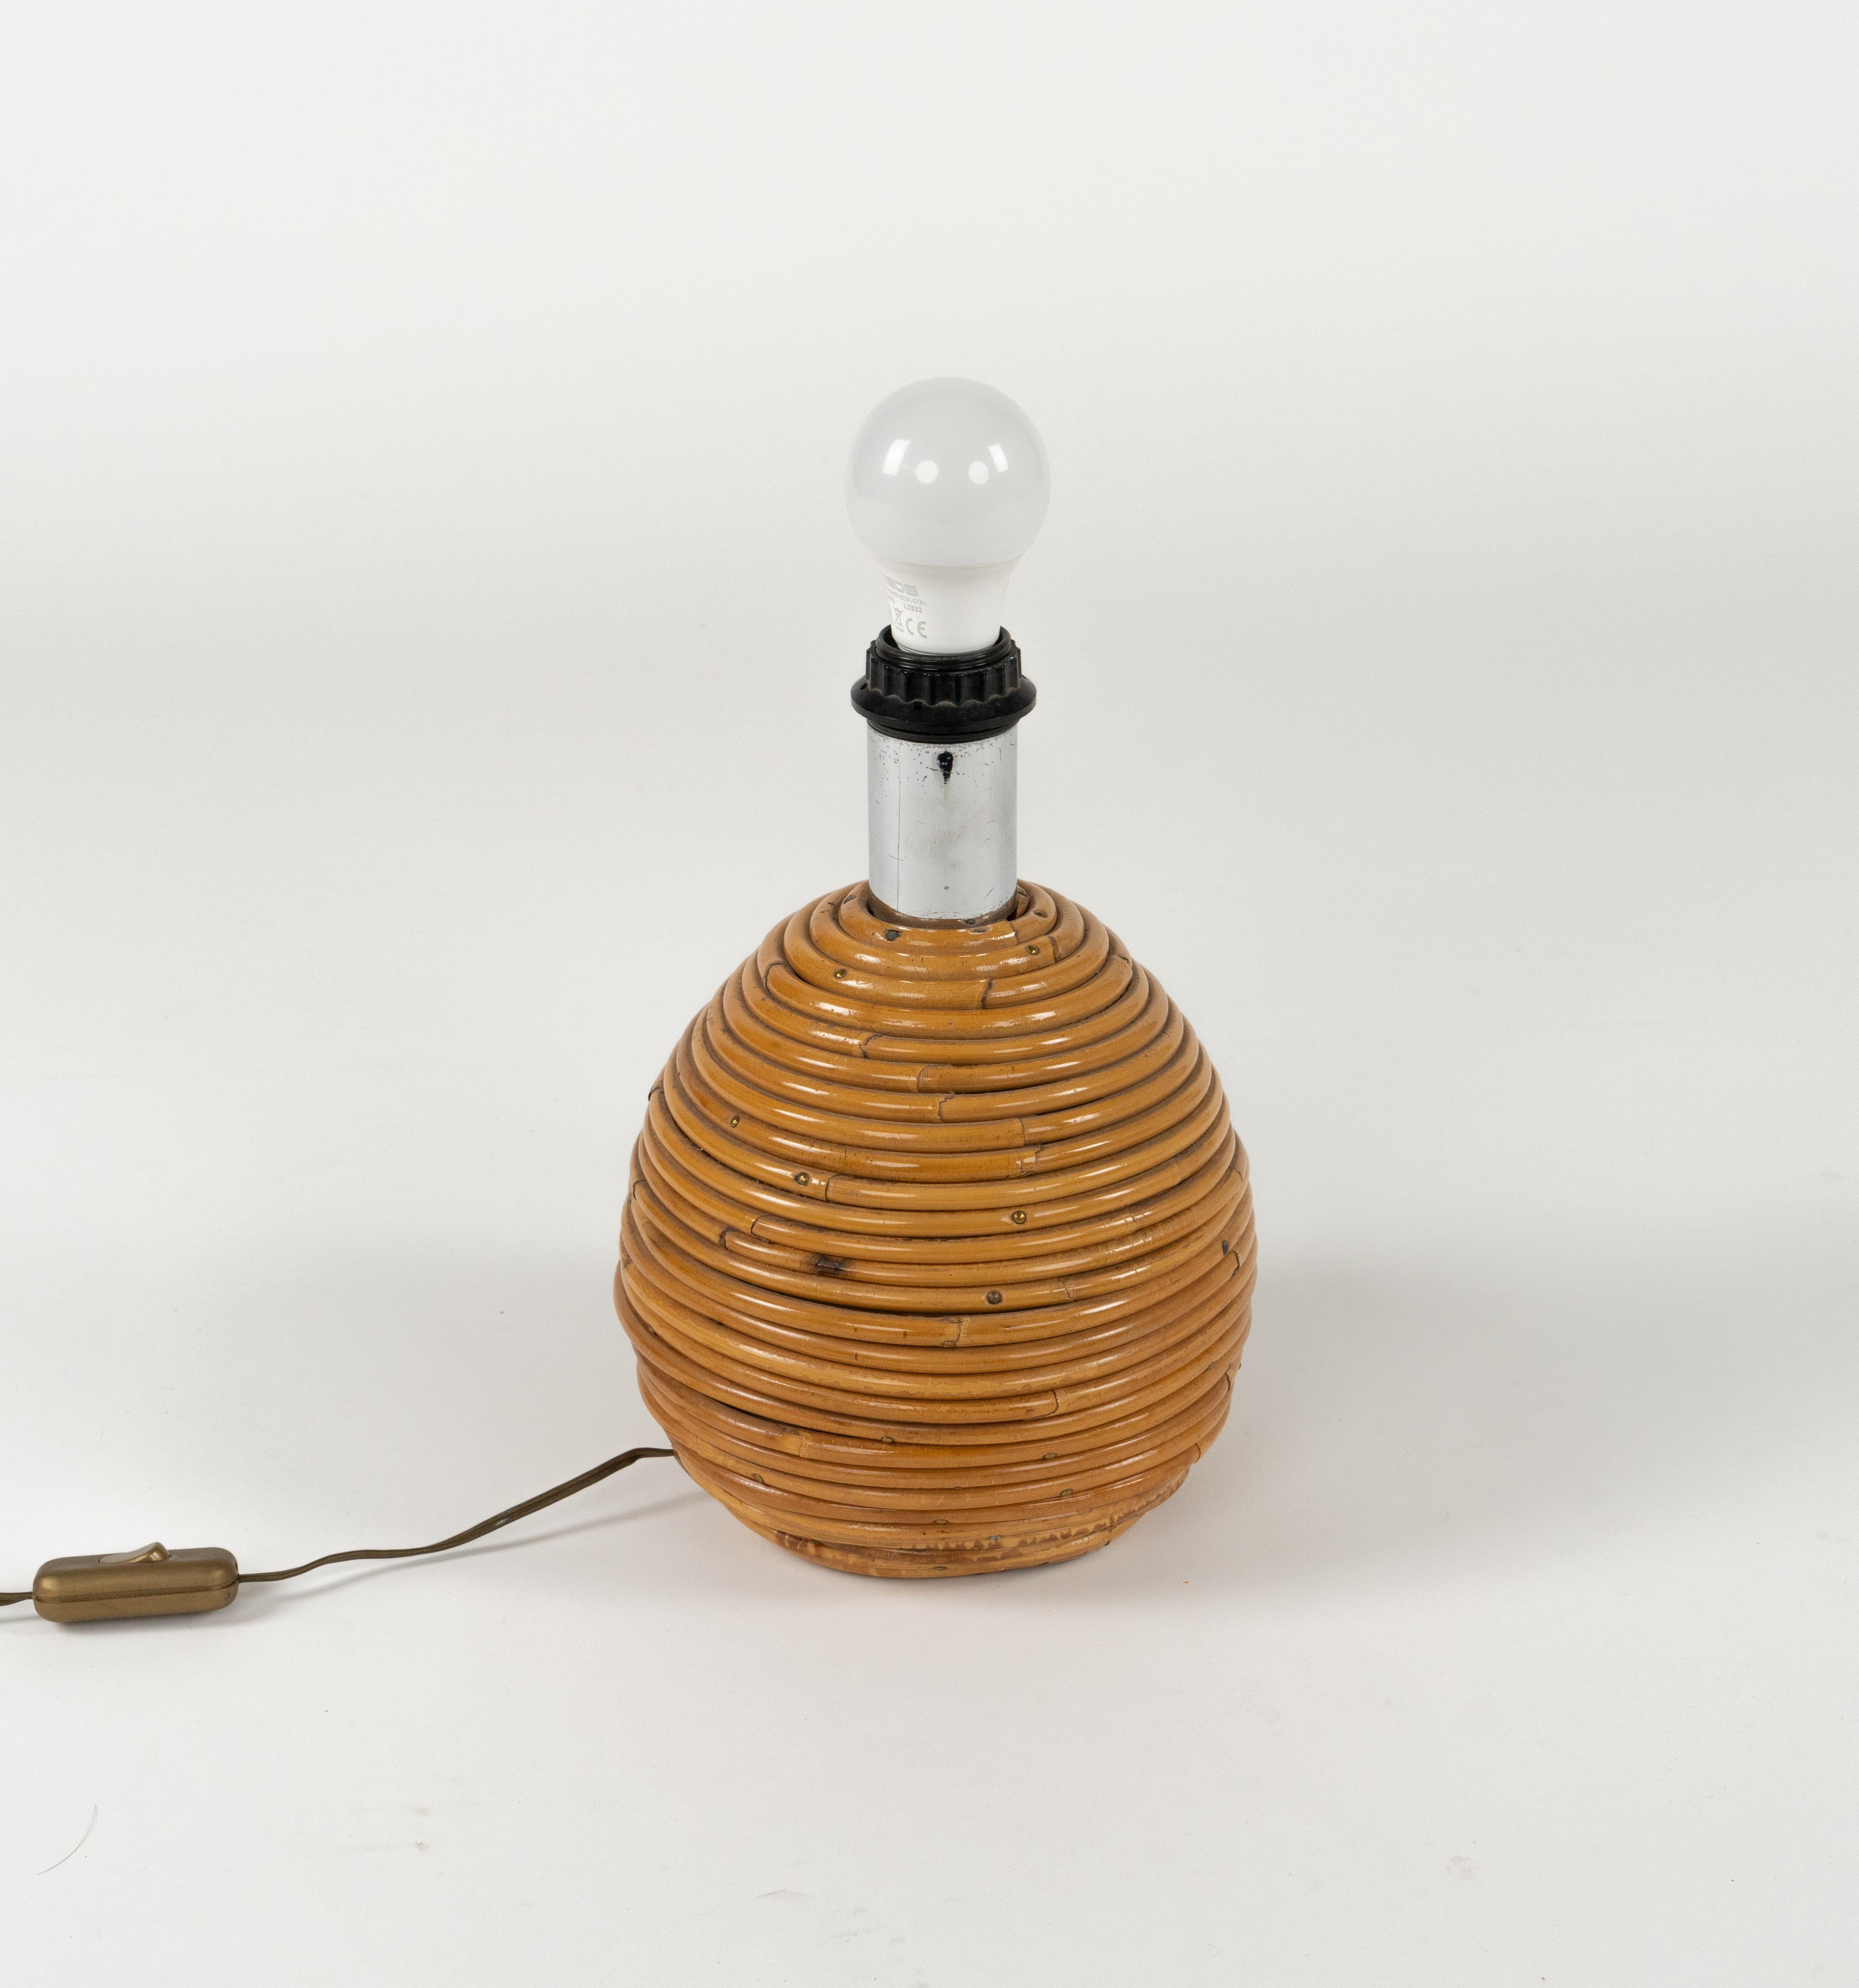 Midcentury Rattan, Wicker and Chrome Table Lamp by Vivai Del Sud, Italy 1970s For Sale 8